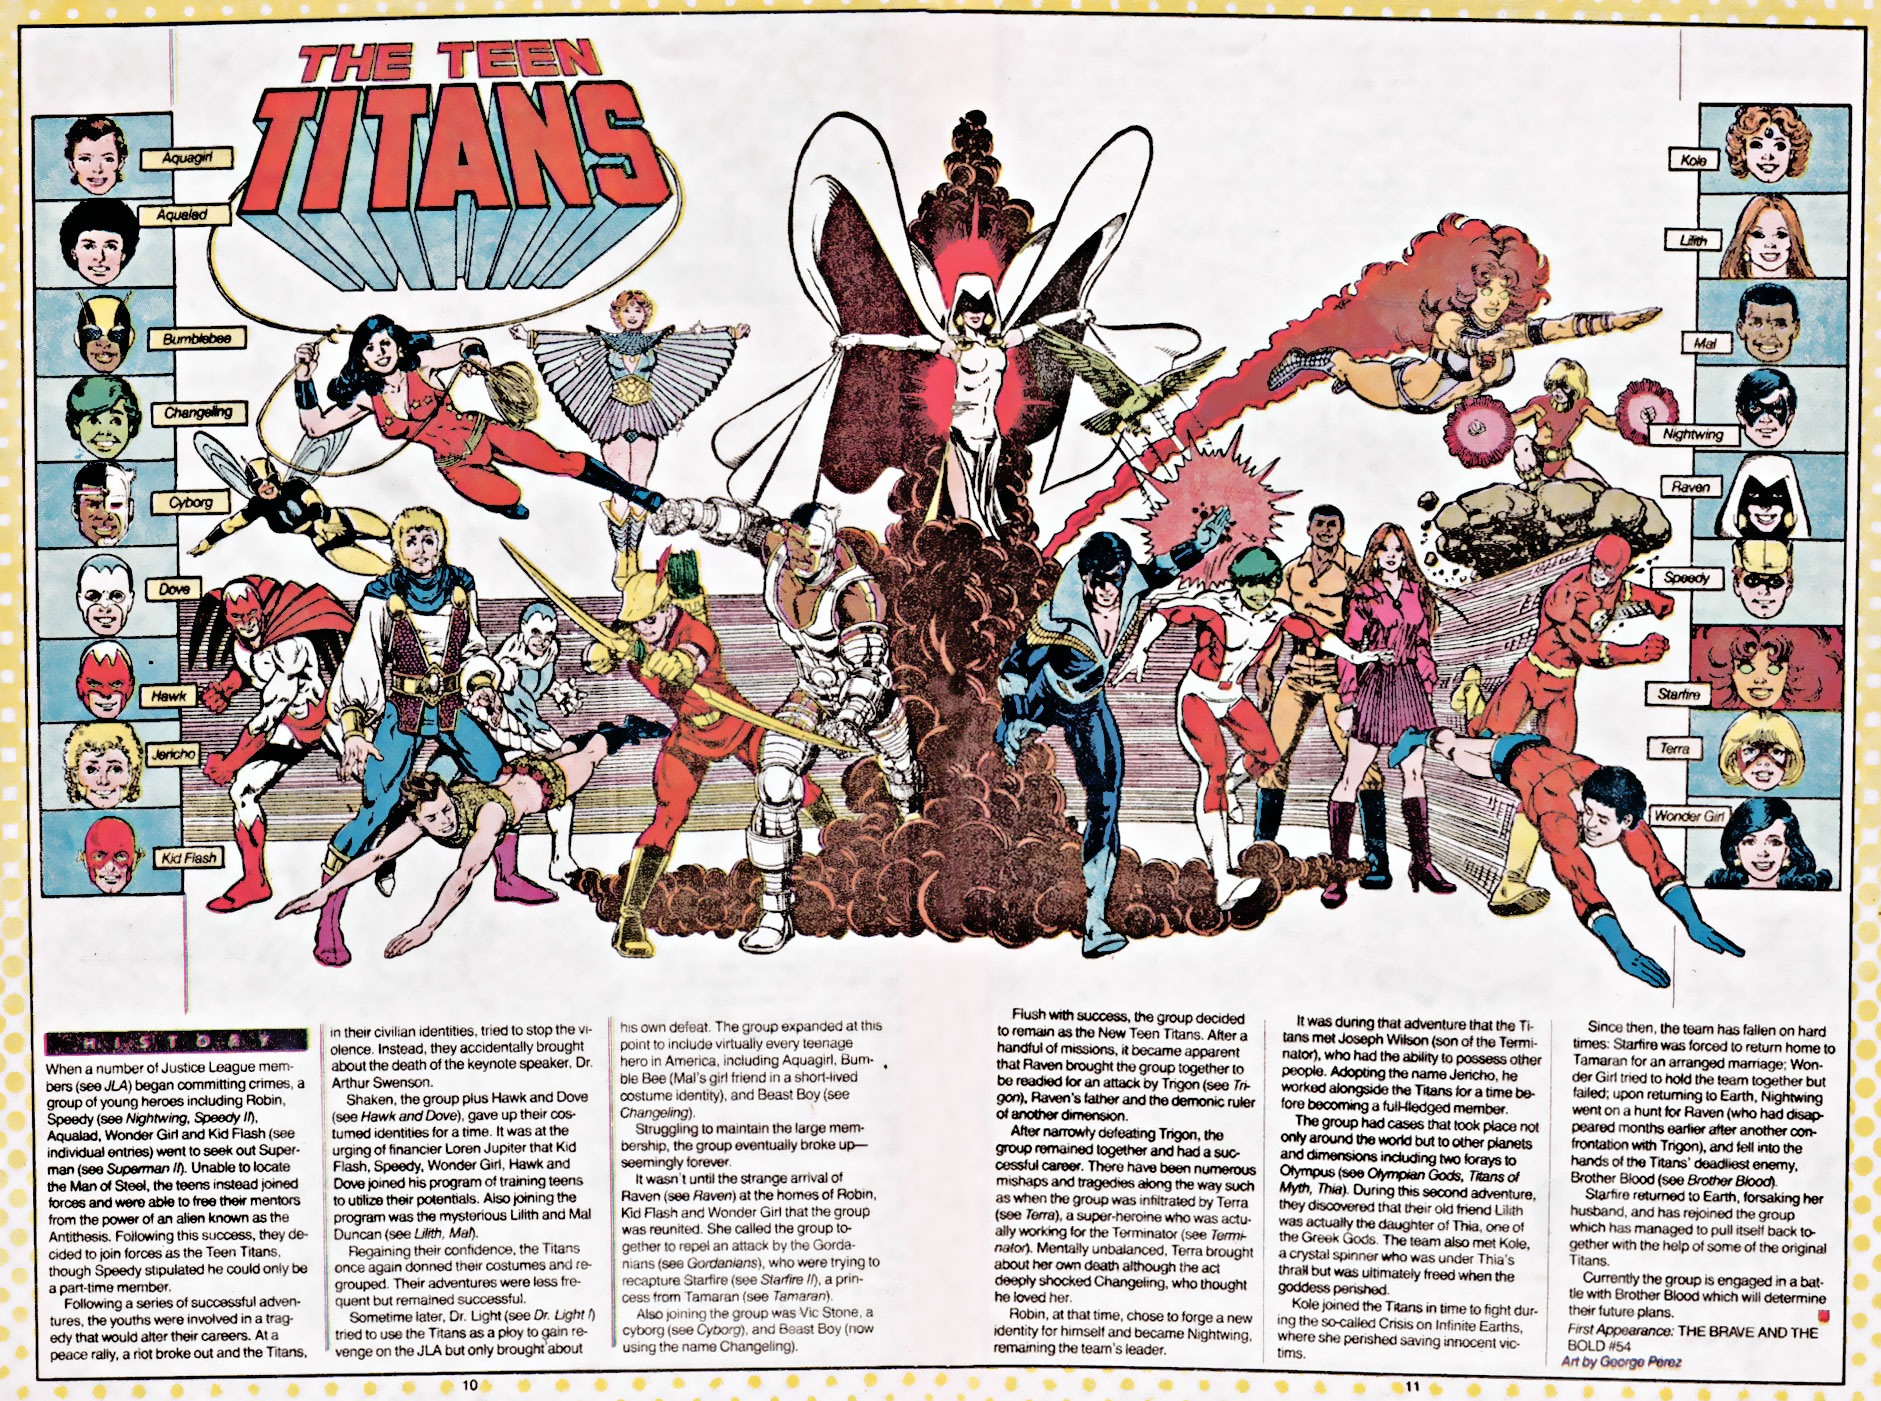 The Teen Titans by George Perez - Who's Who: The Definitive Directory of the DC Universe #23